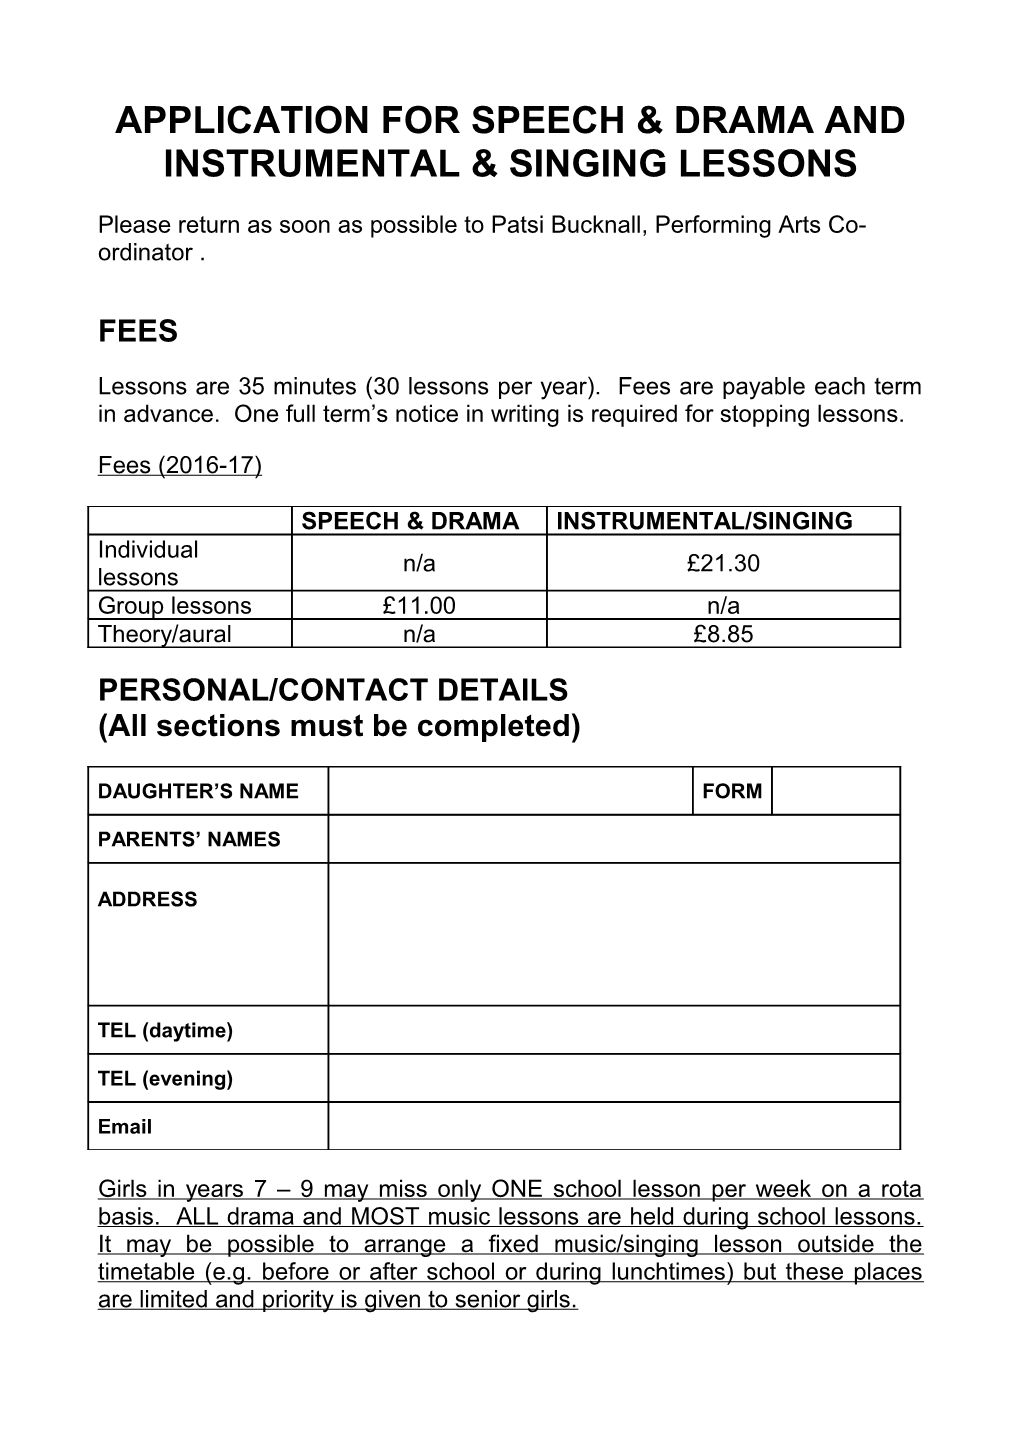 Application for Speech & Drama and Instrumental & Singing Lessons